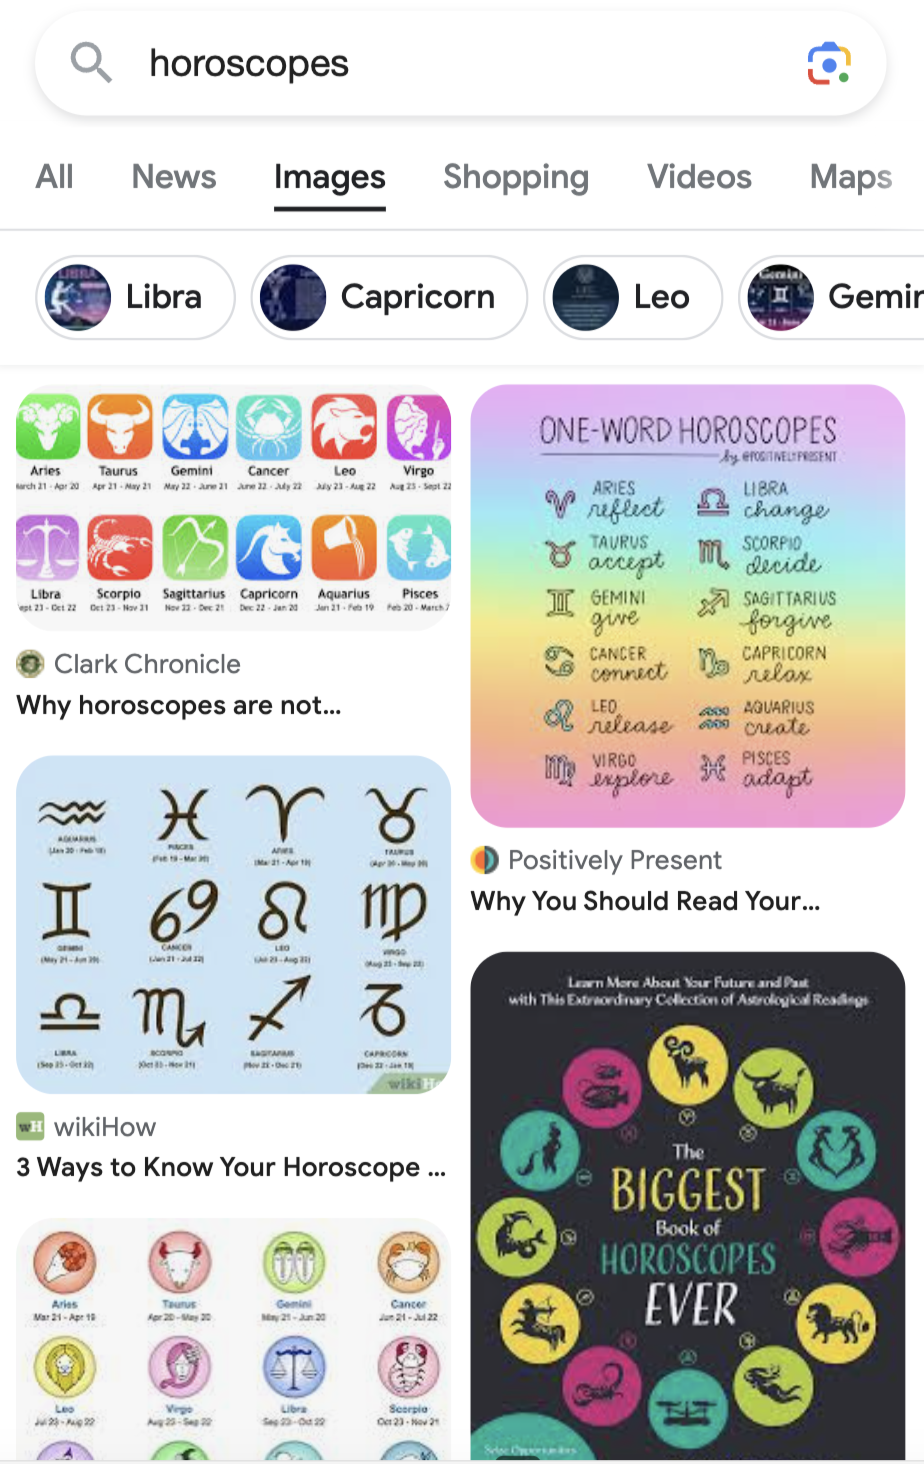 Google “Images” results for "horoscopes" connected  mobile device